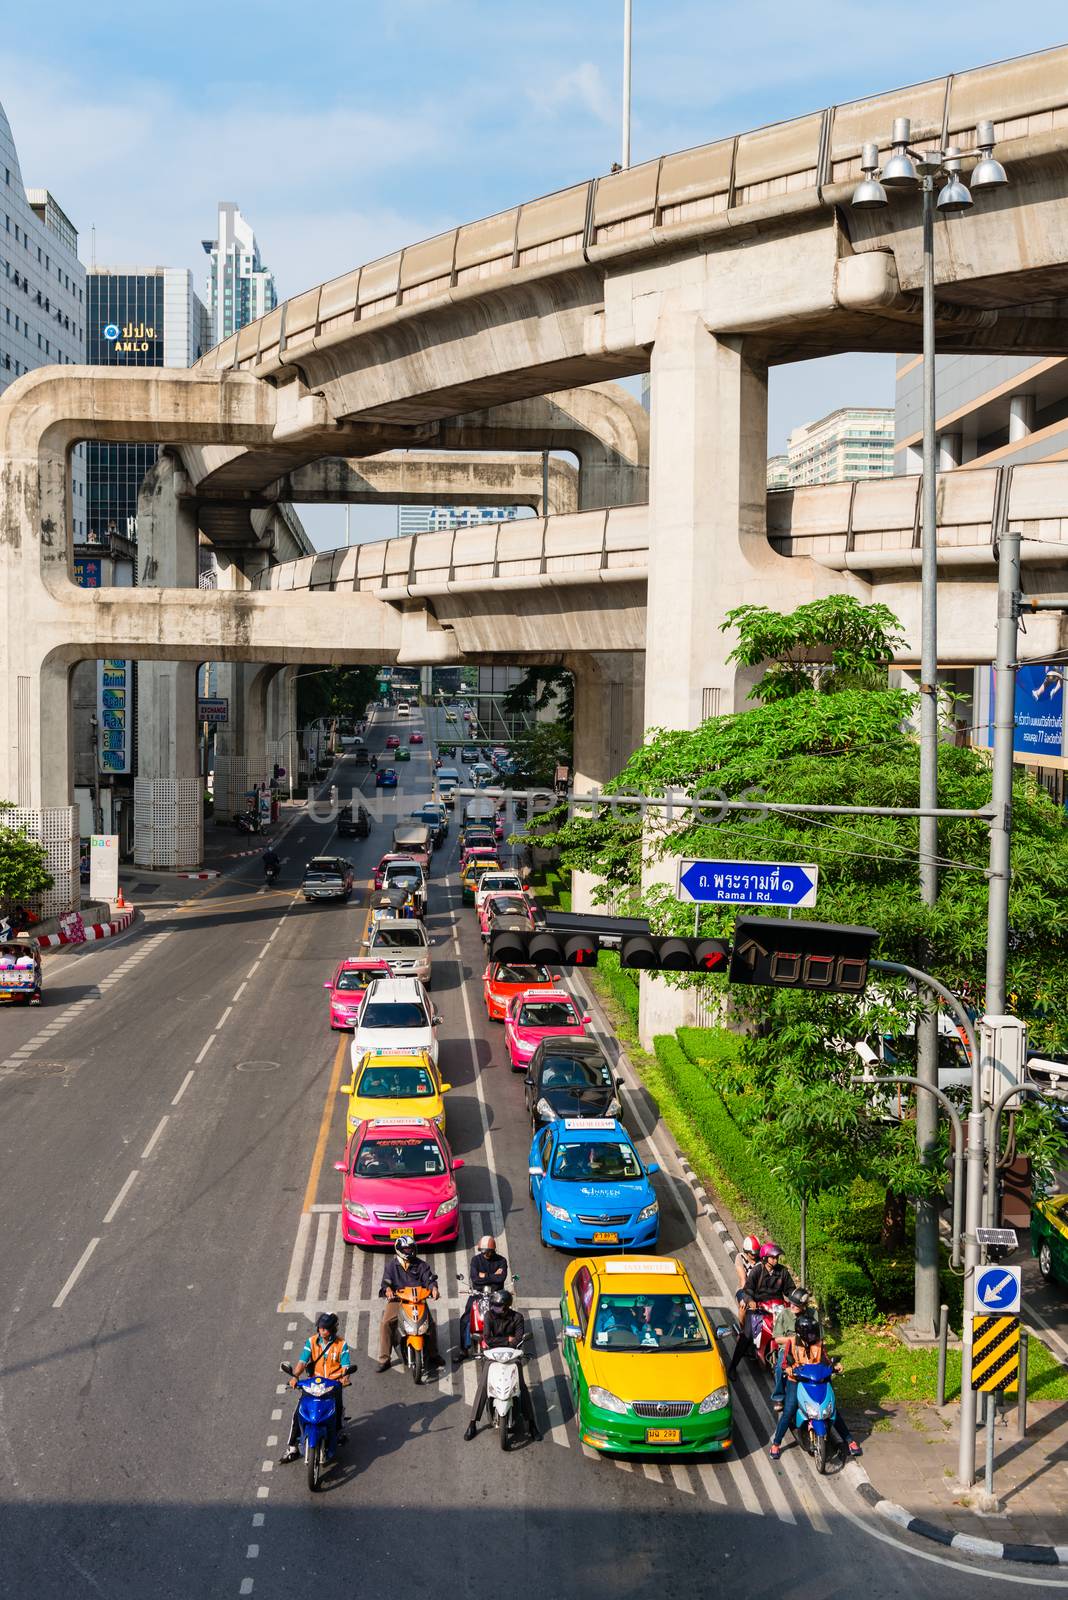 BANGKOK, THAILAND - 21 NOV 2013: Motorbikes and cars stop on traffic light with two level skytrain tracks above street